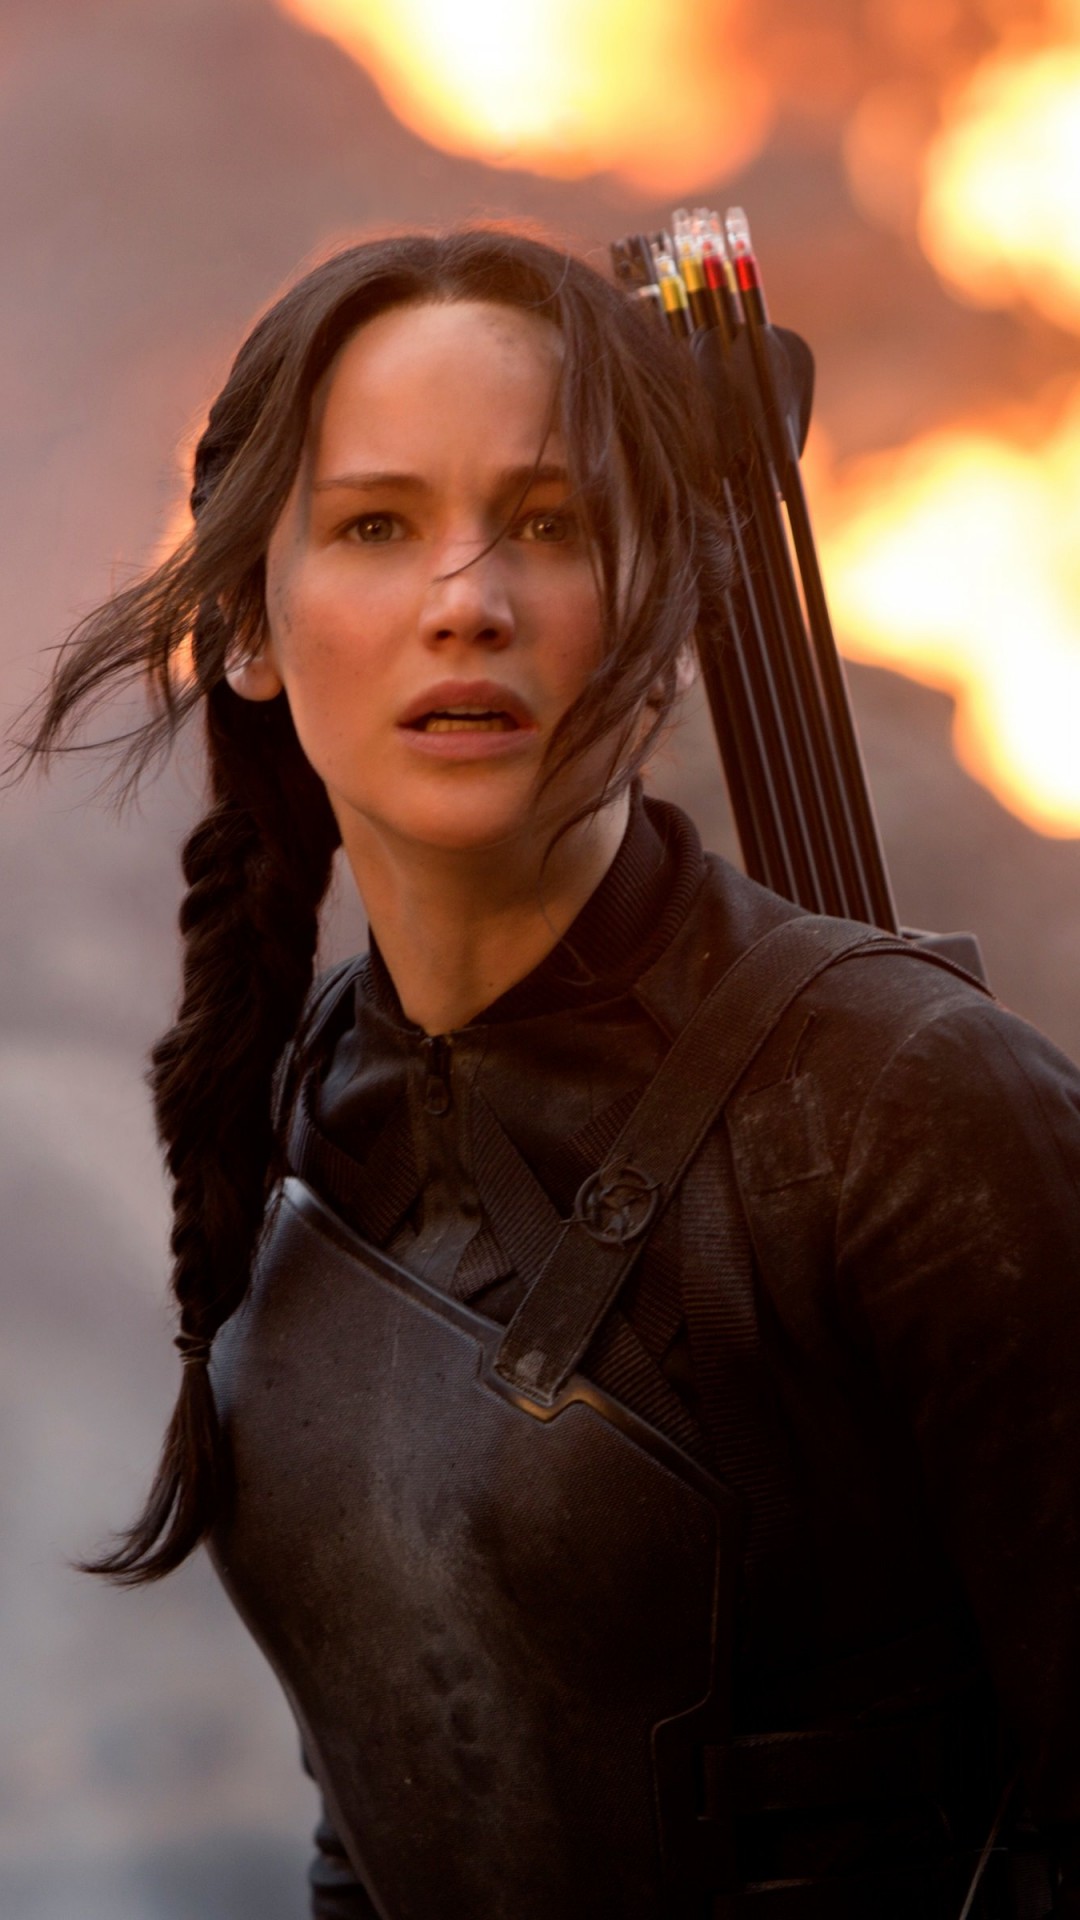 Jennifer Lawrence in The Hunger Games Wallpaper for SAMSUNG Galaxy S5